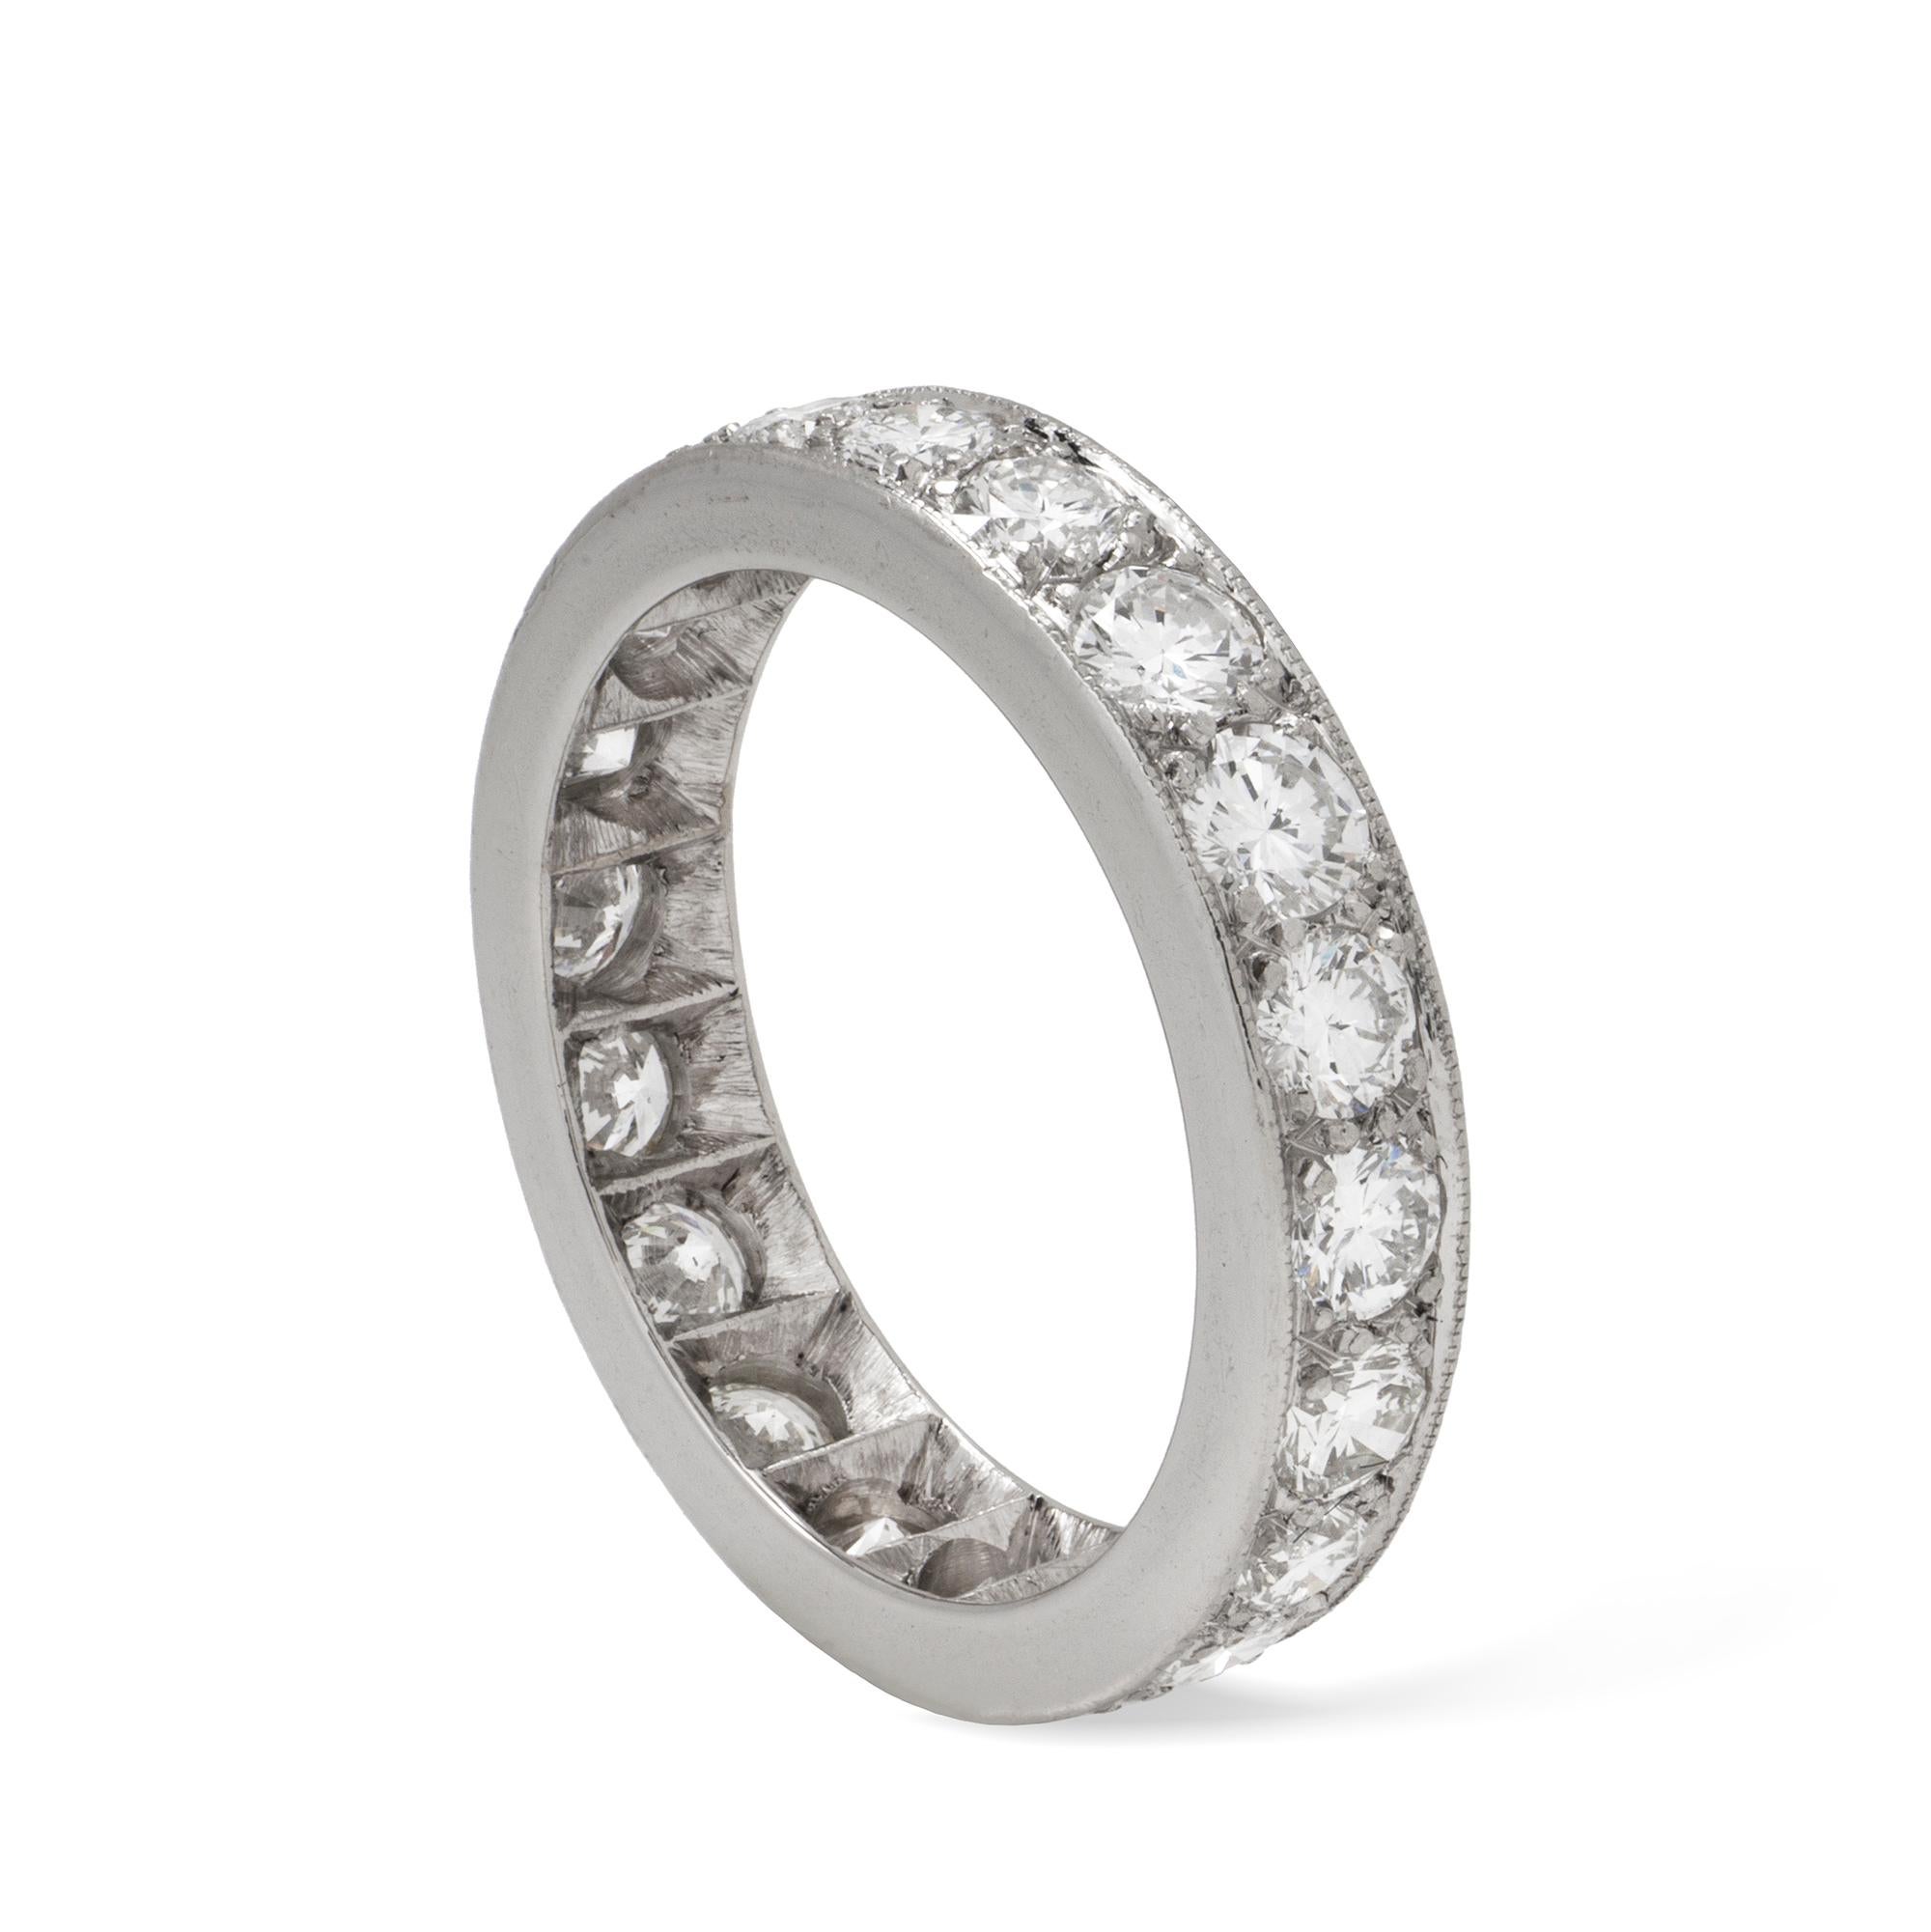 A diamond full eternity ring, consisting of twenty round brilliant-cut diamonds estimated to weigh 3 carats in total, all grain set in platinum mount, later hallmarked 950 platinum, London, bearing the Bentley & Skinner sponsor mark, measuring